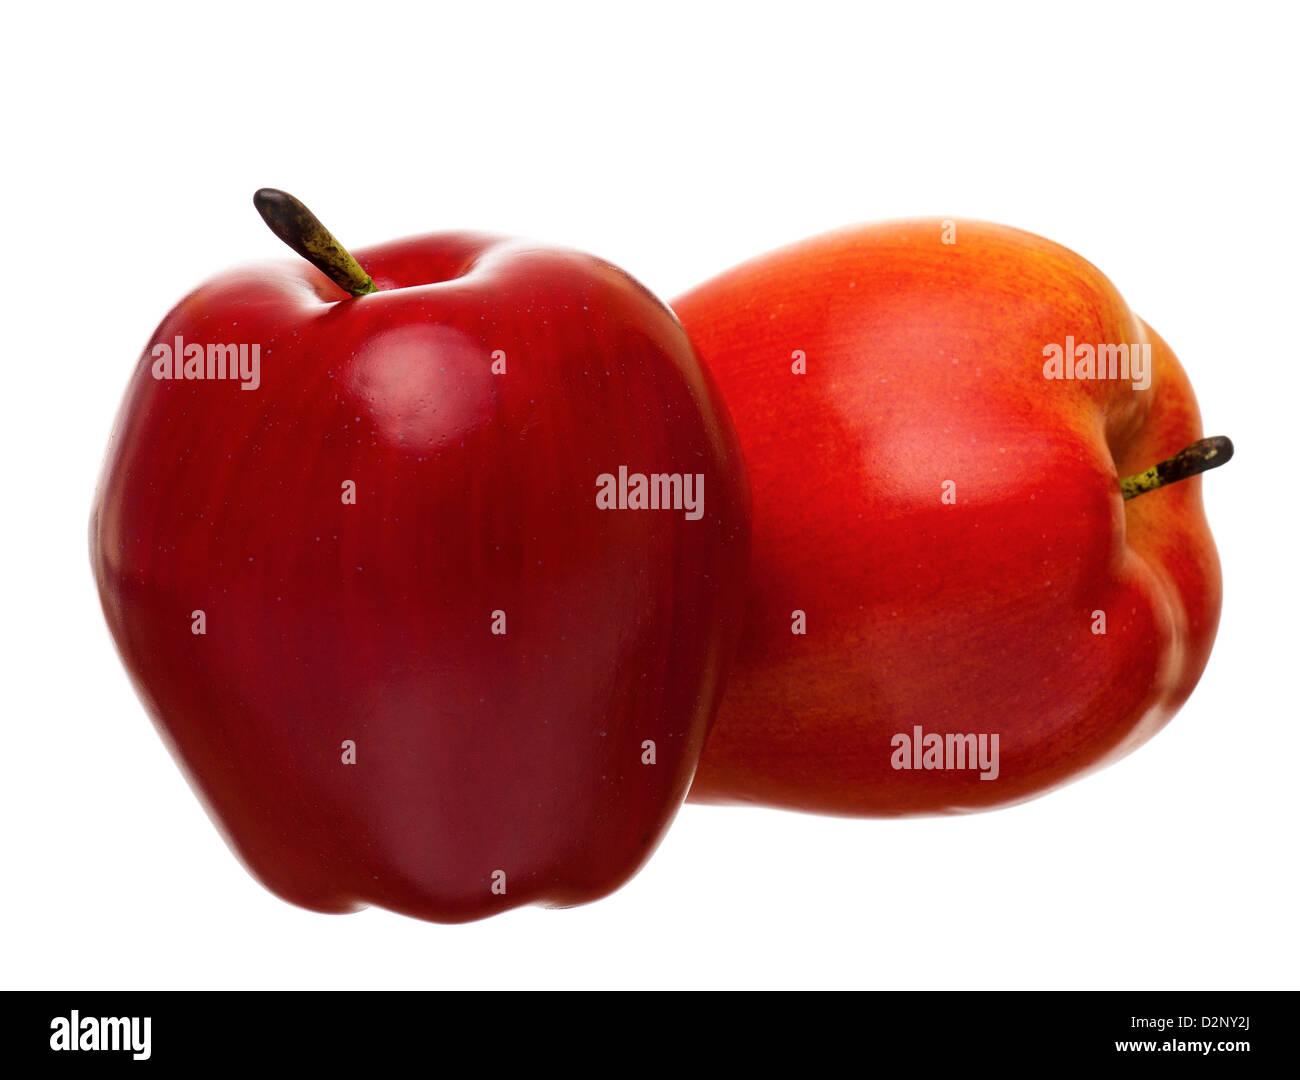 Artificial red and orange apples, isolated on white background Stock Photo